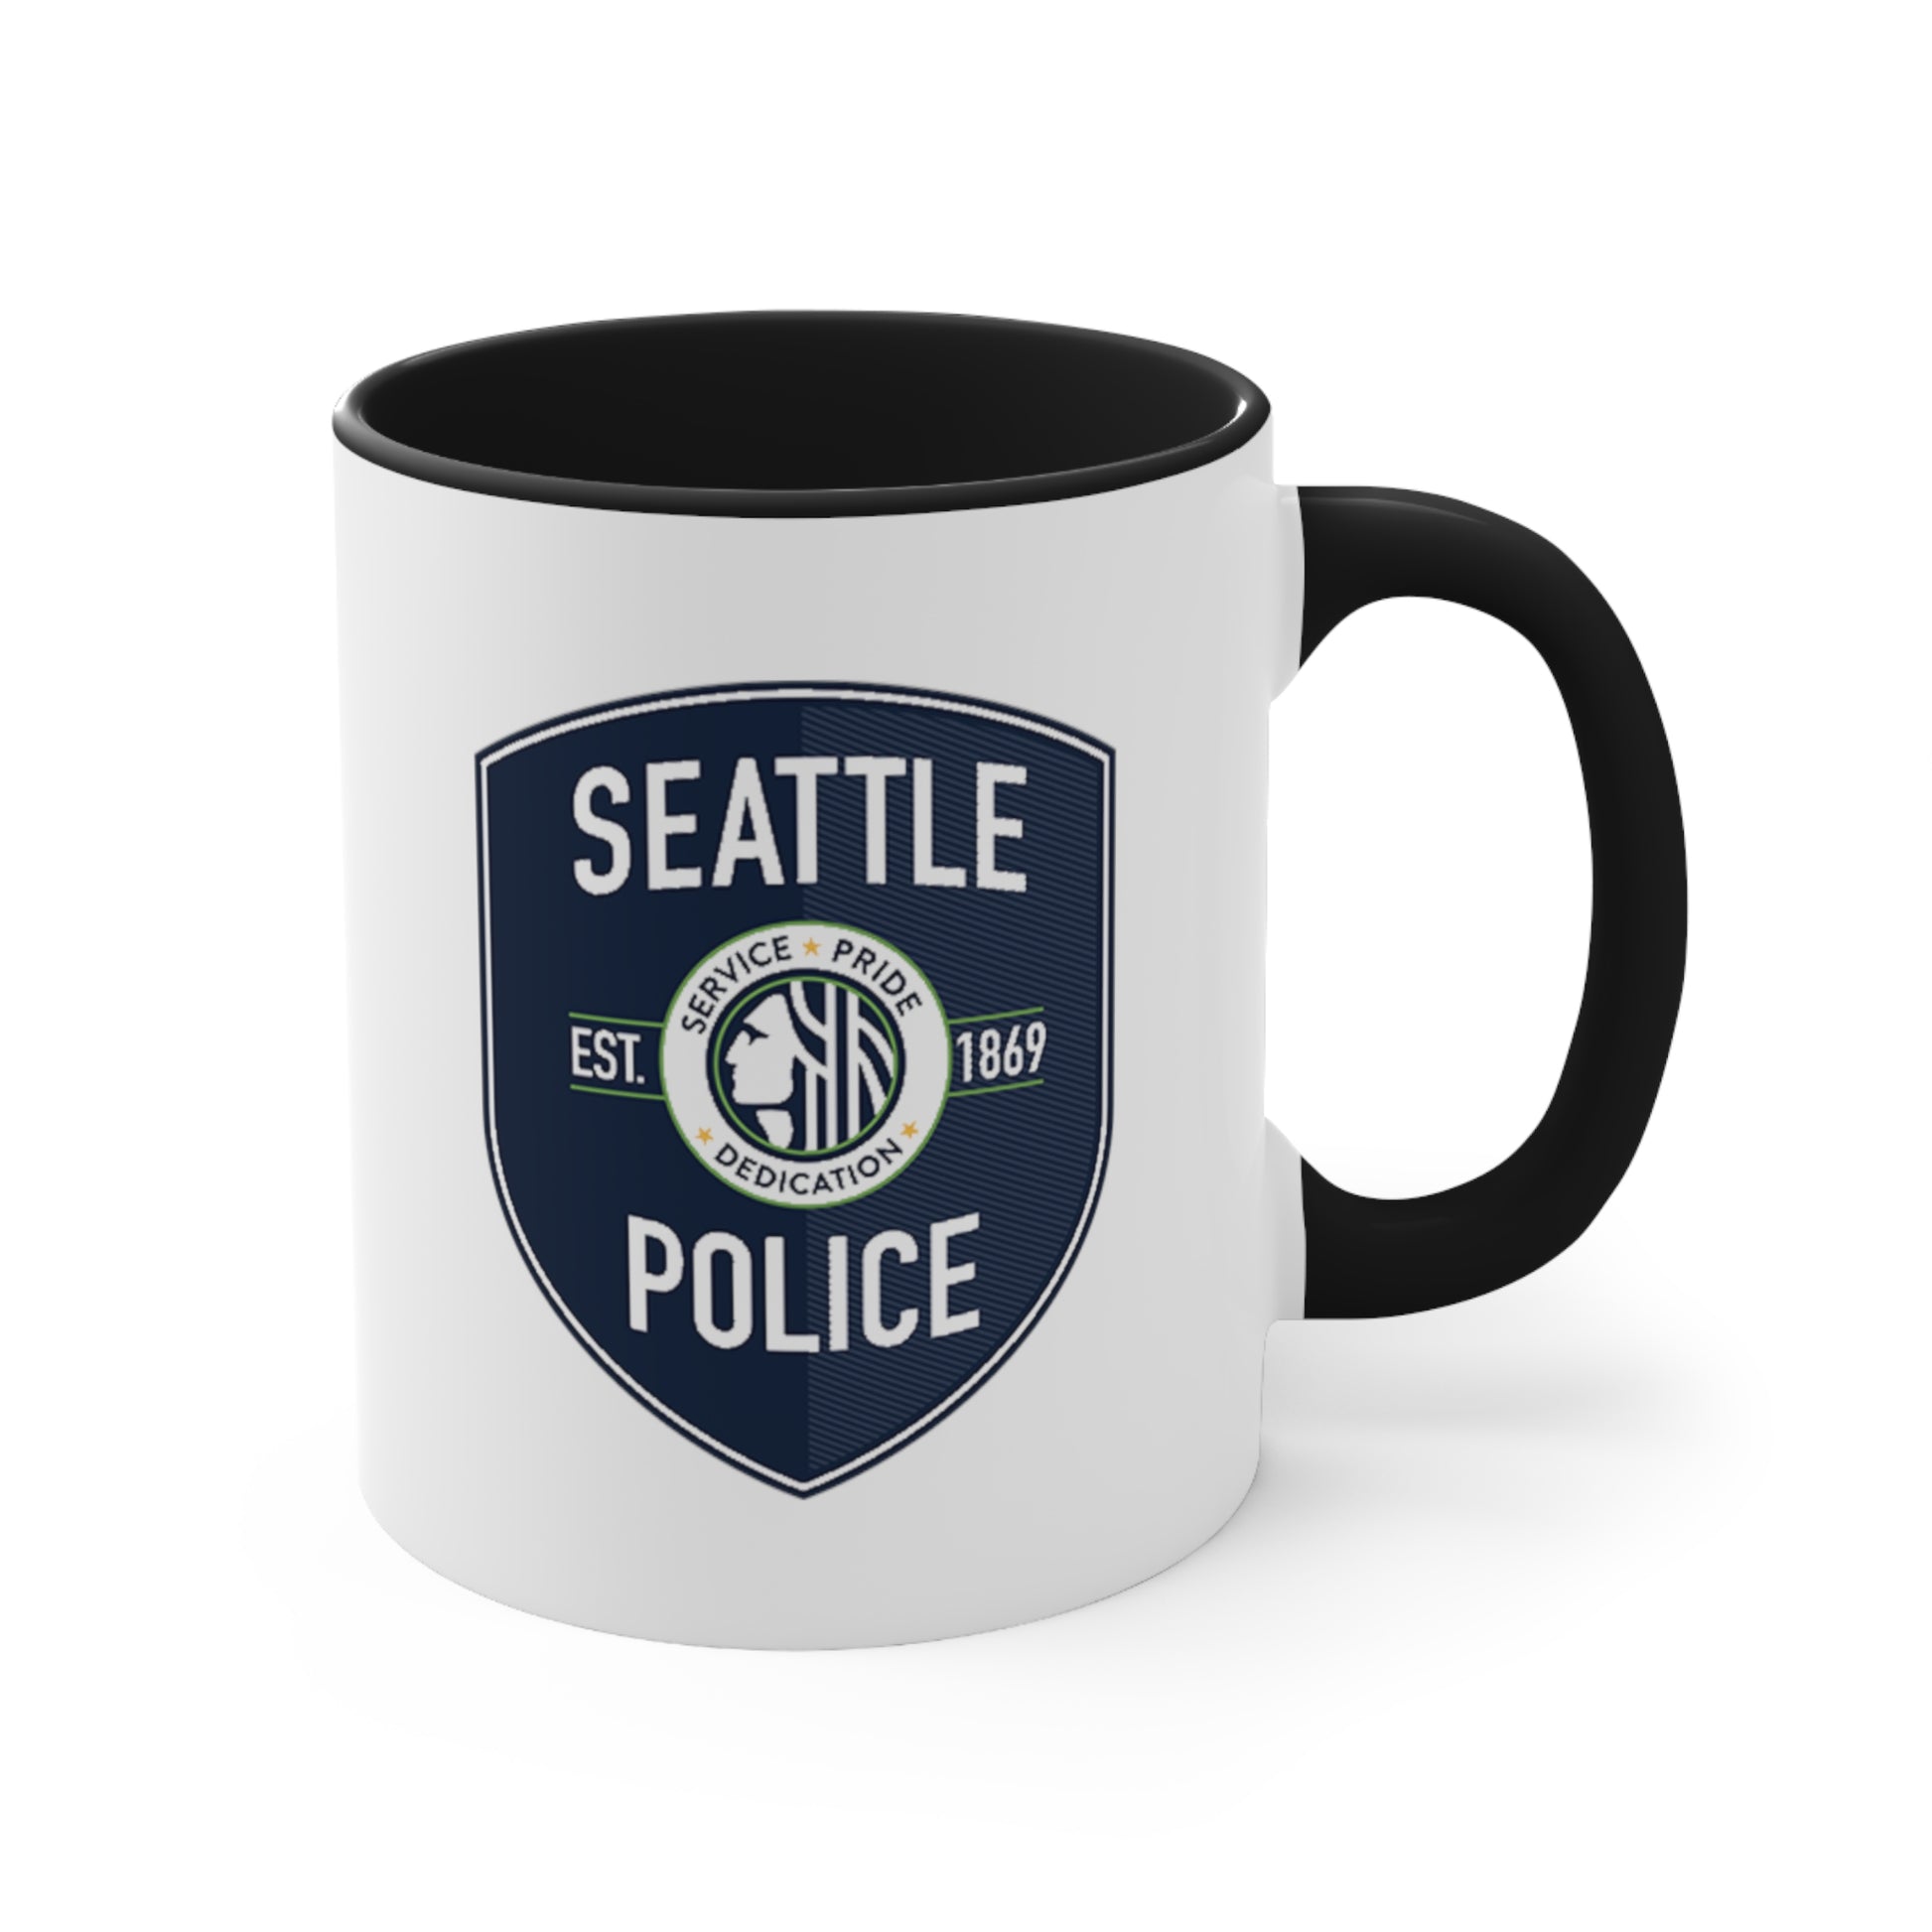 Seattle Police Coffee Mug - Double Sided Black Accent White Ceramic 11oz by TheGlassyLass.com